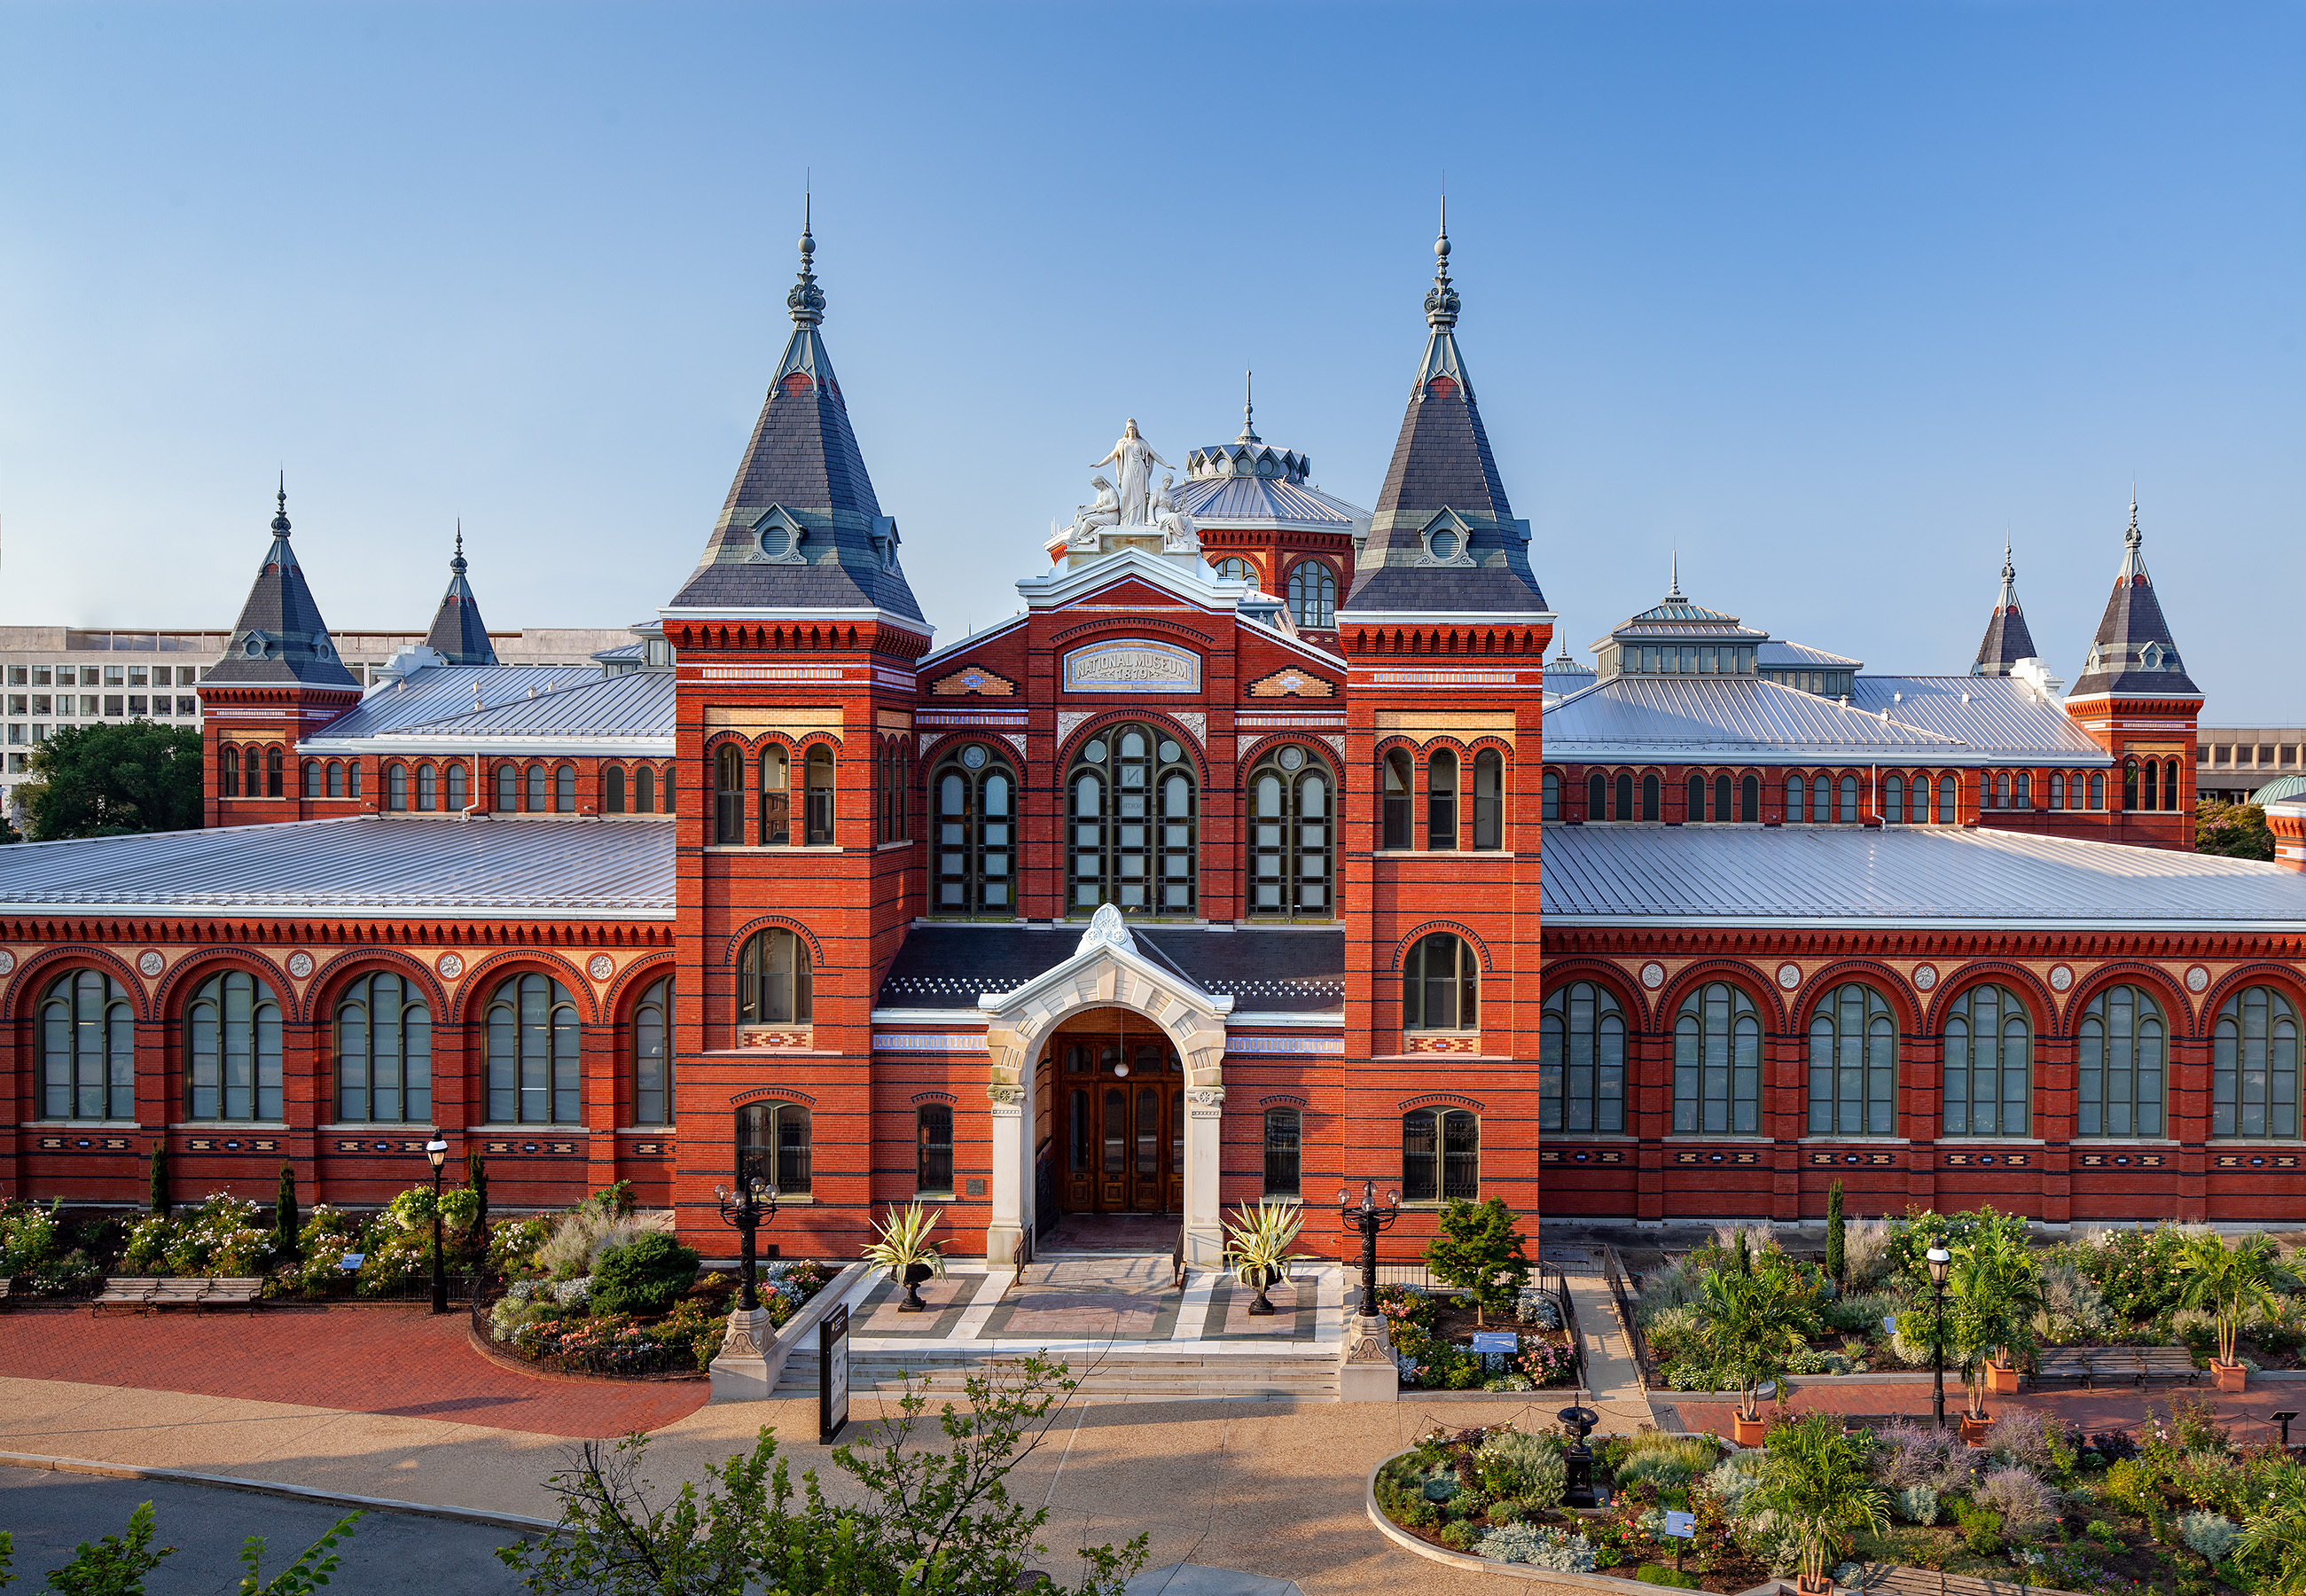 Exterior of Arts and Industries Building